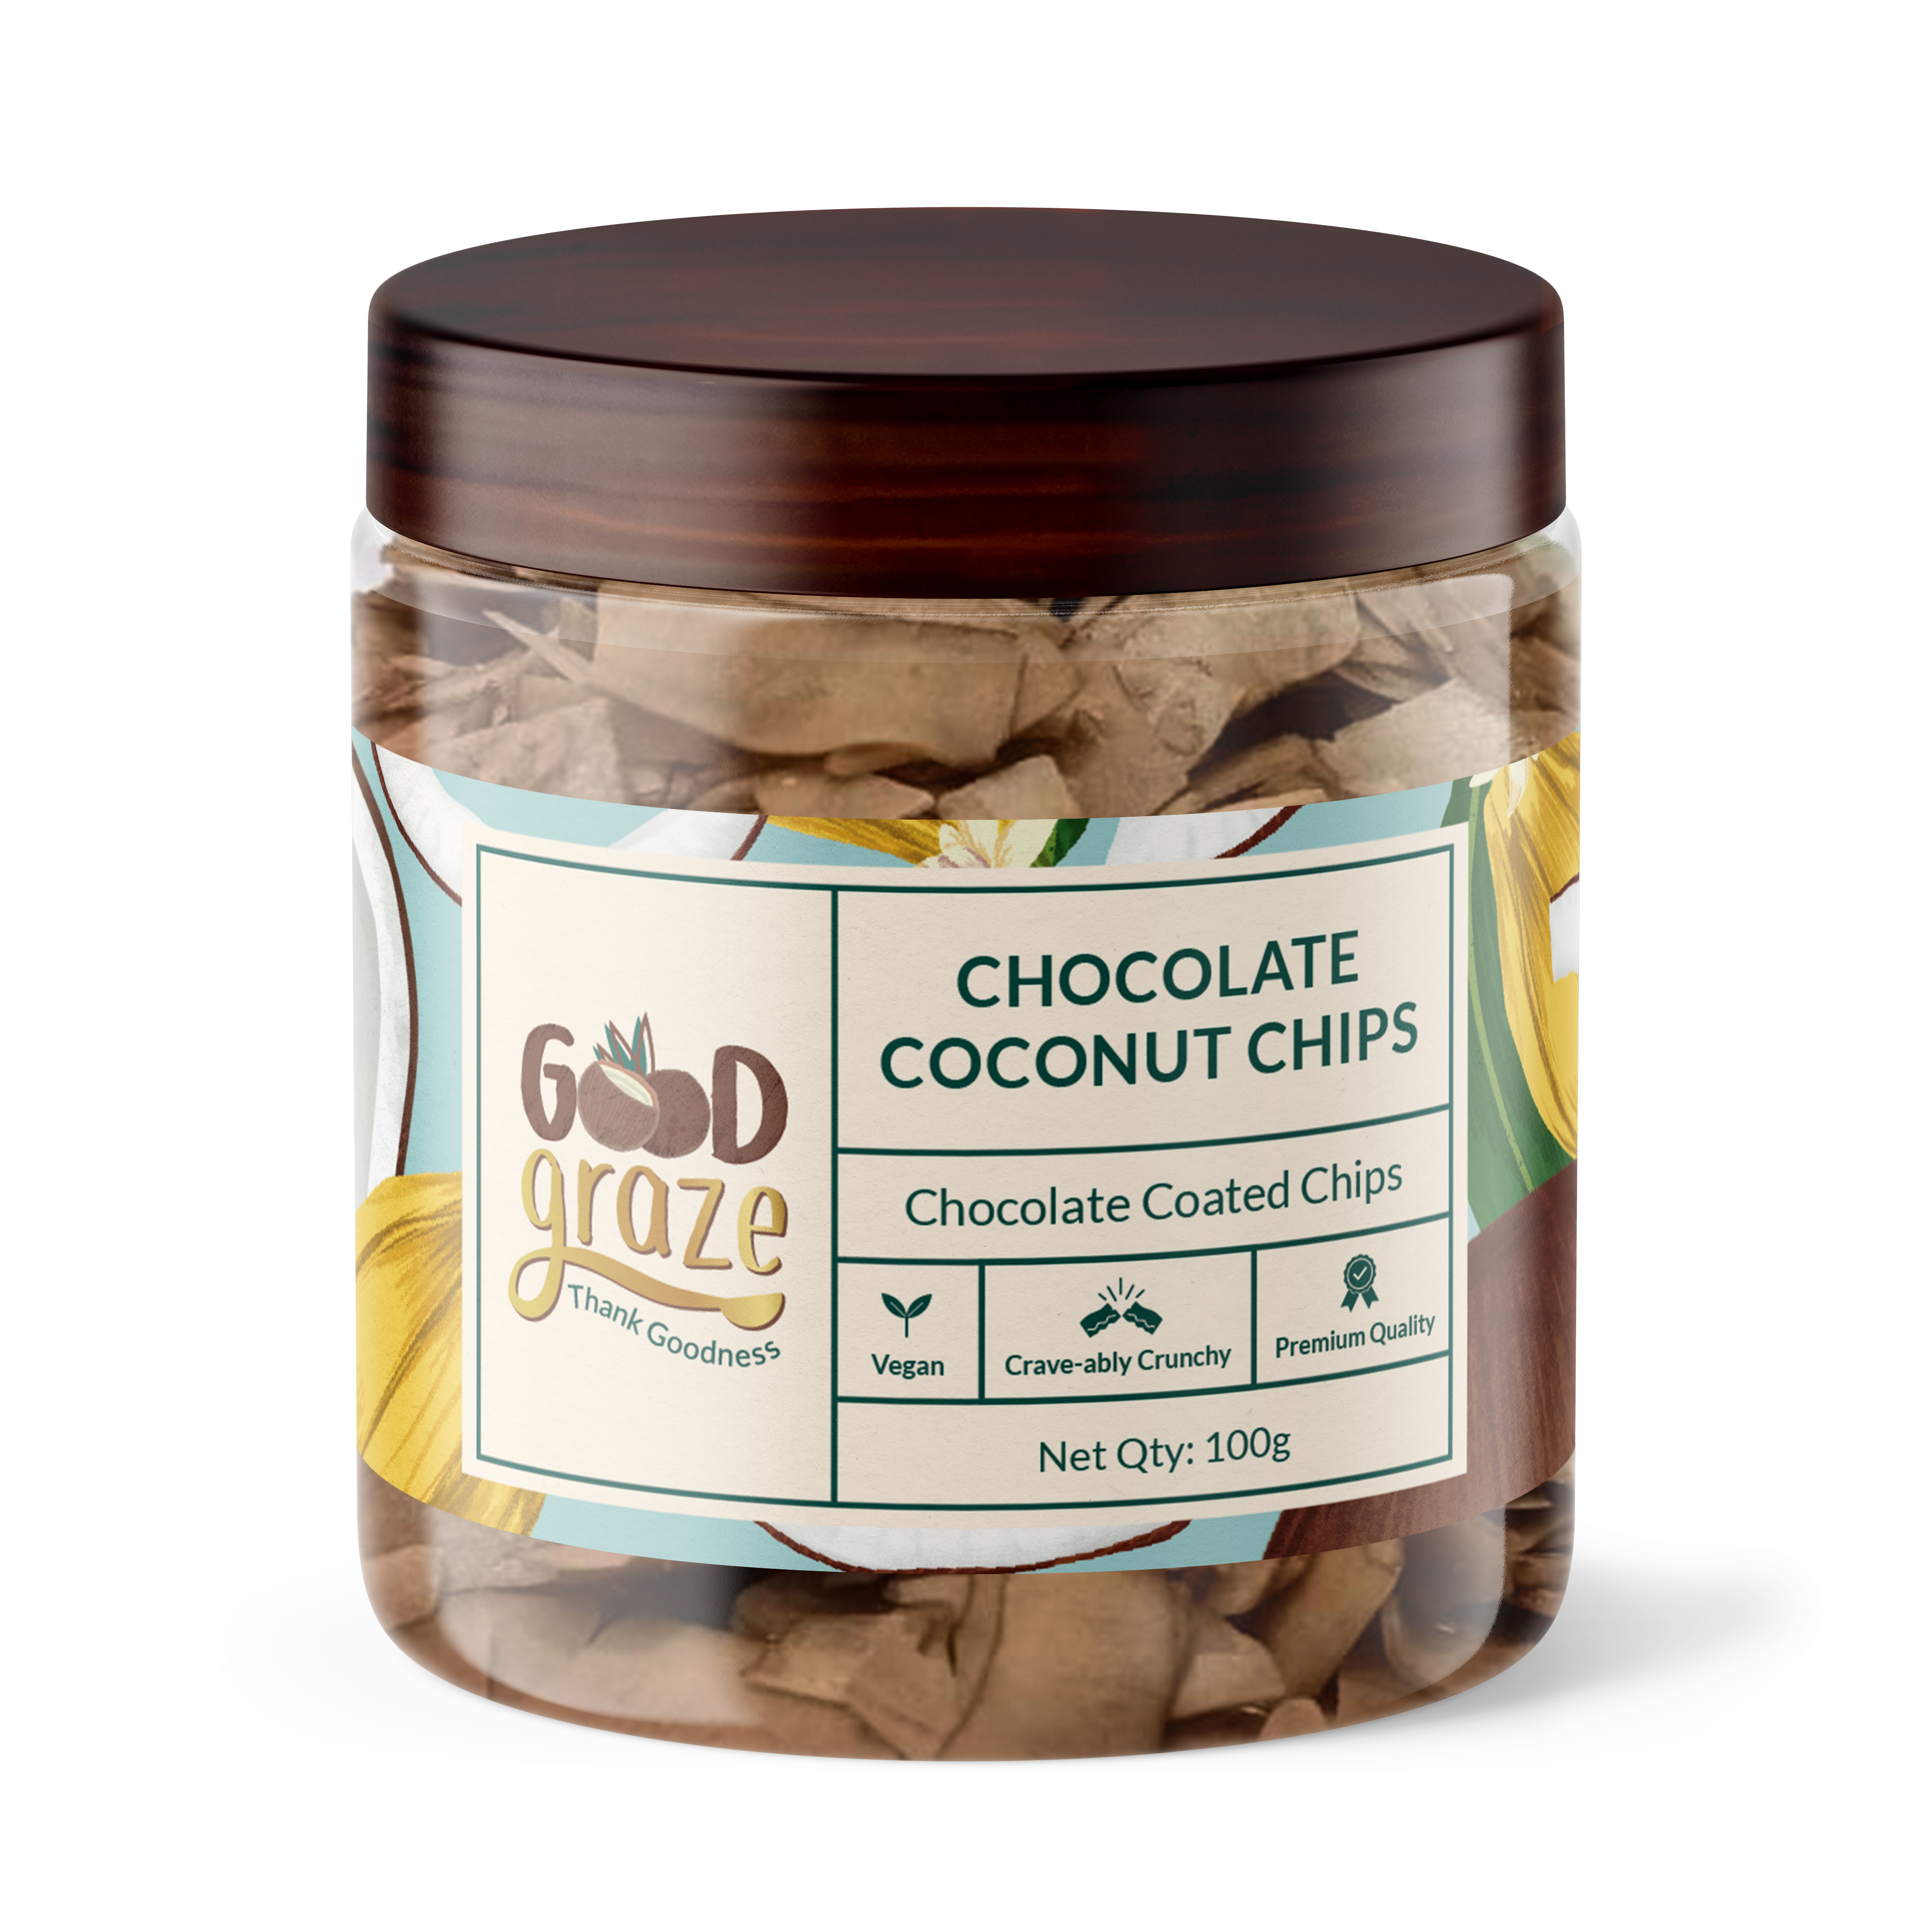 Chocolate Coconut Chips • Pack of 2 • 200g